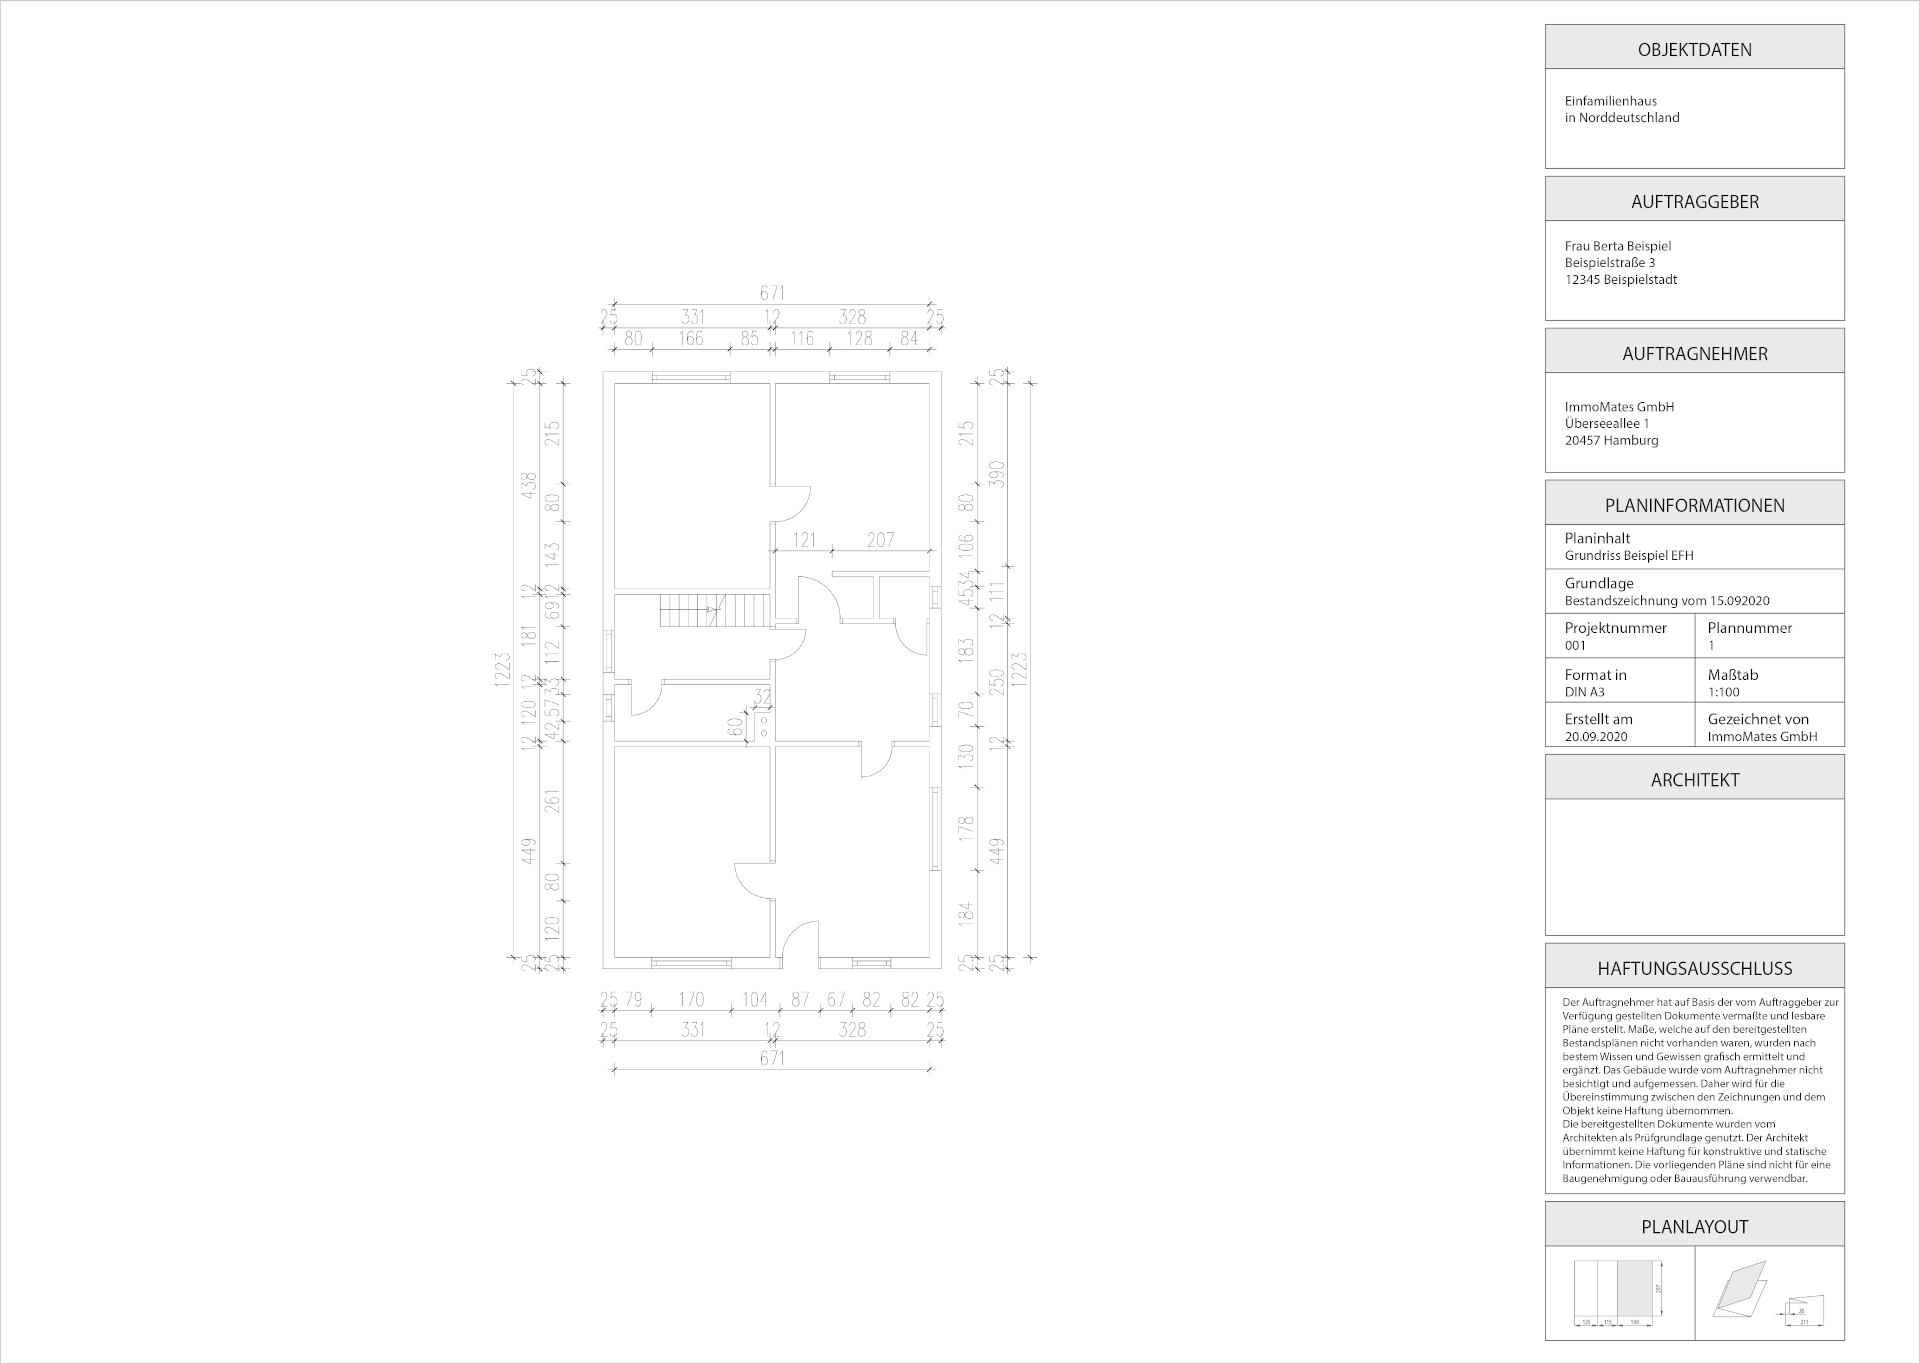 Result of the dimensioned ground floor plan